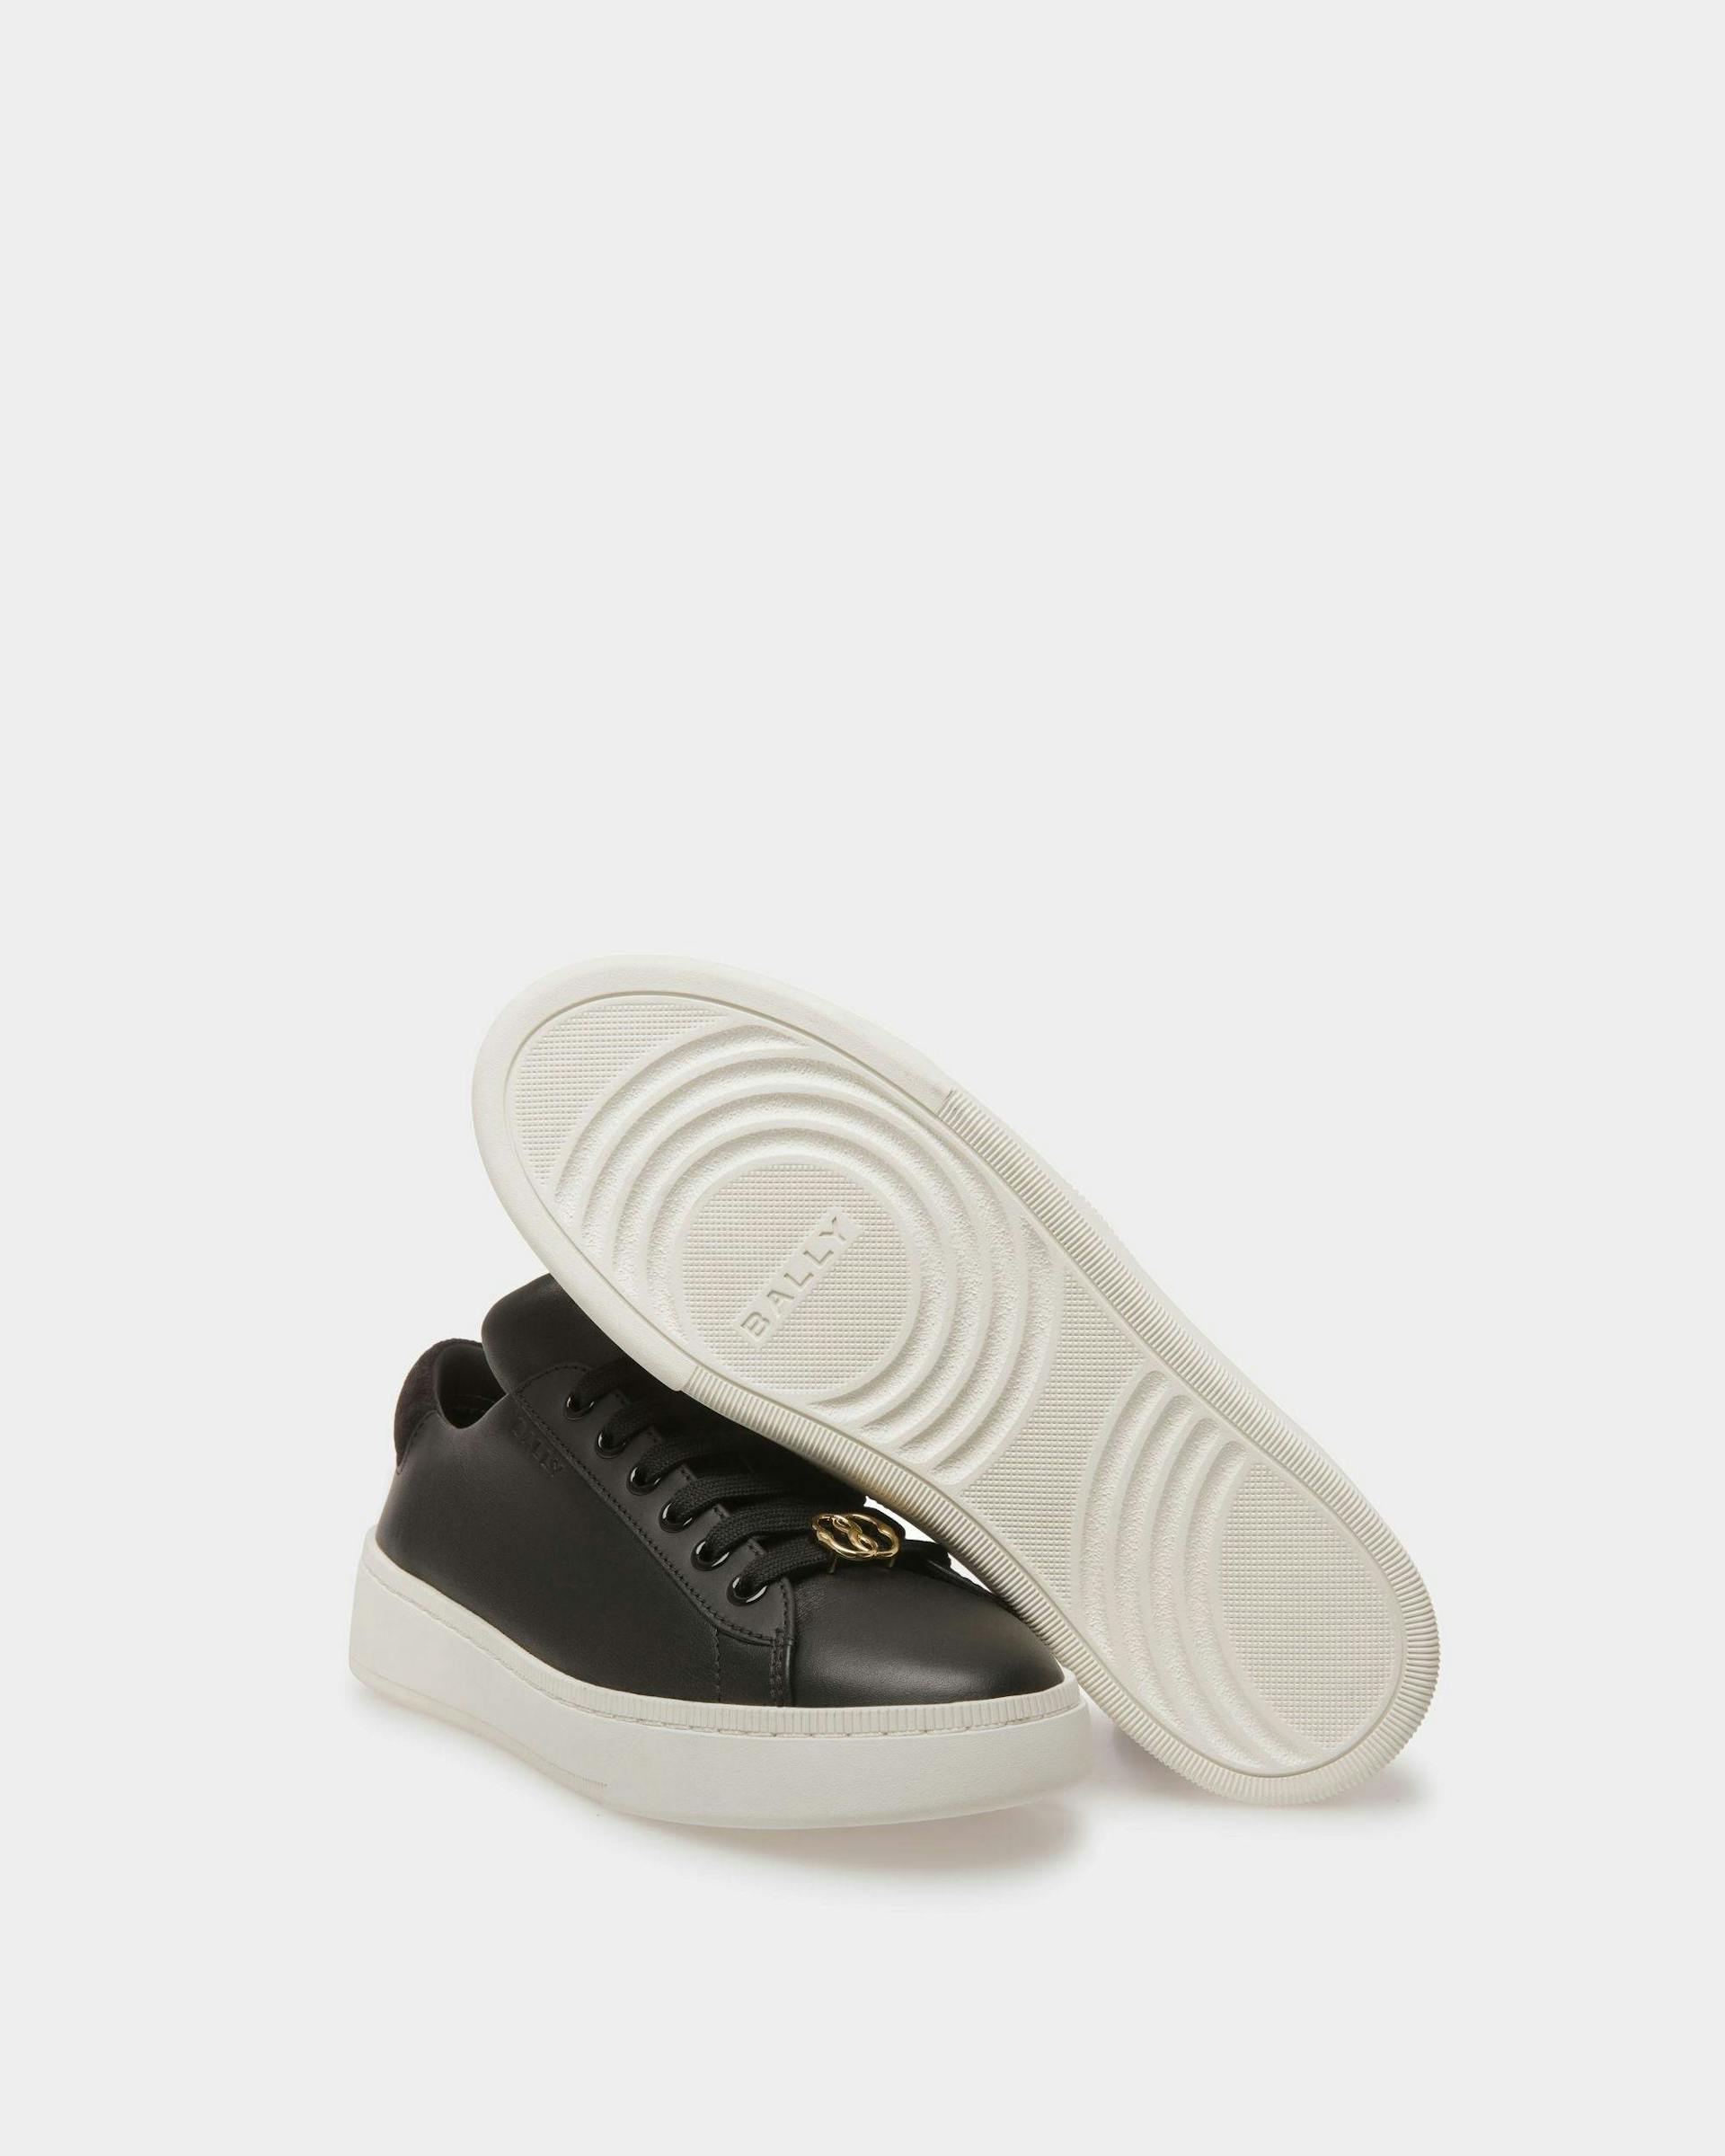 Raise Sneakers In Black And White Leather - Women's - Bally - 06